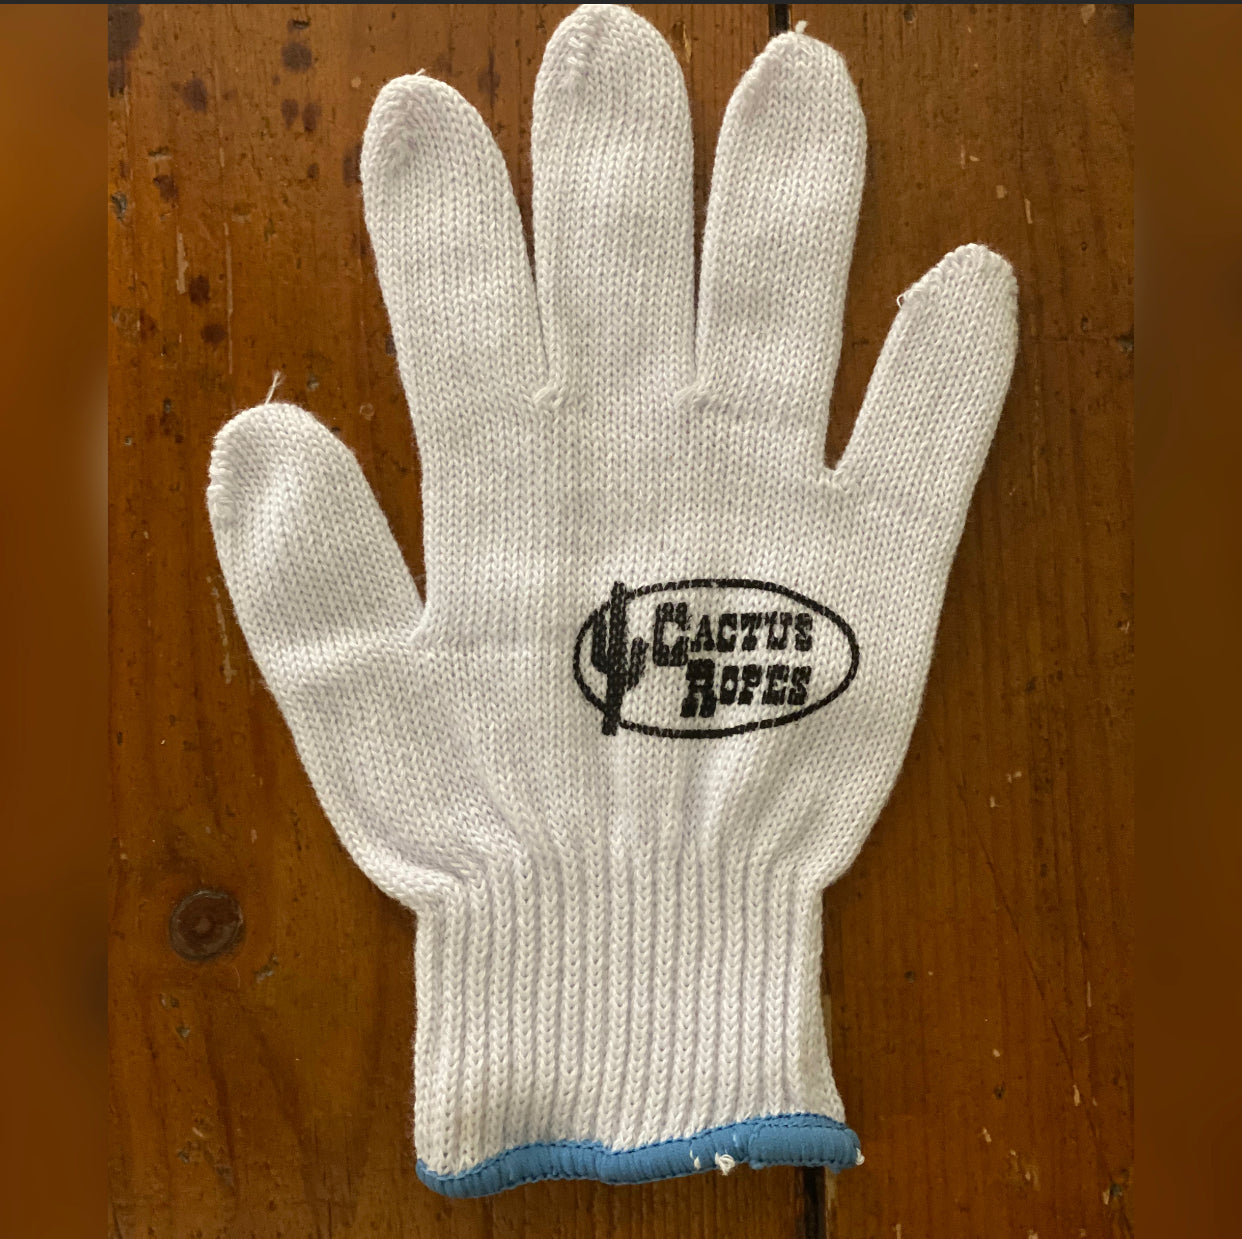 A7695 - Youth / Ladies Cactus Ropes Roping Glove